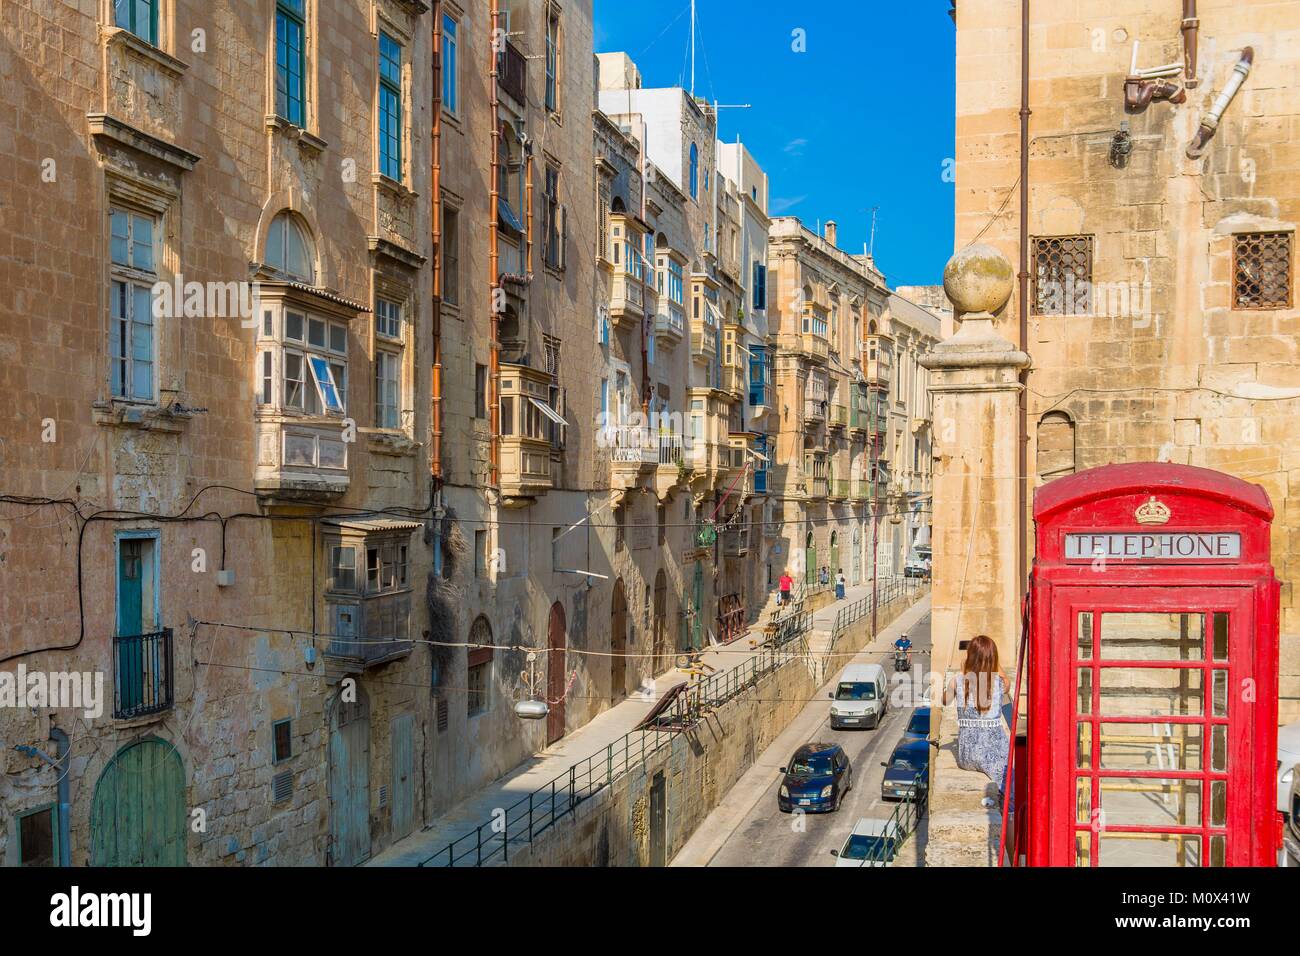 Malta,Valletta,listed as World Heritage by UNESCO,city centre,typical alleyway and telephone booth Stock Photo